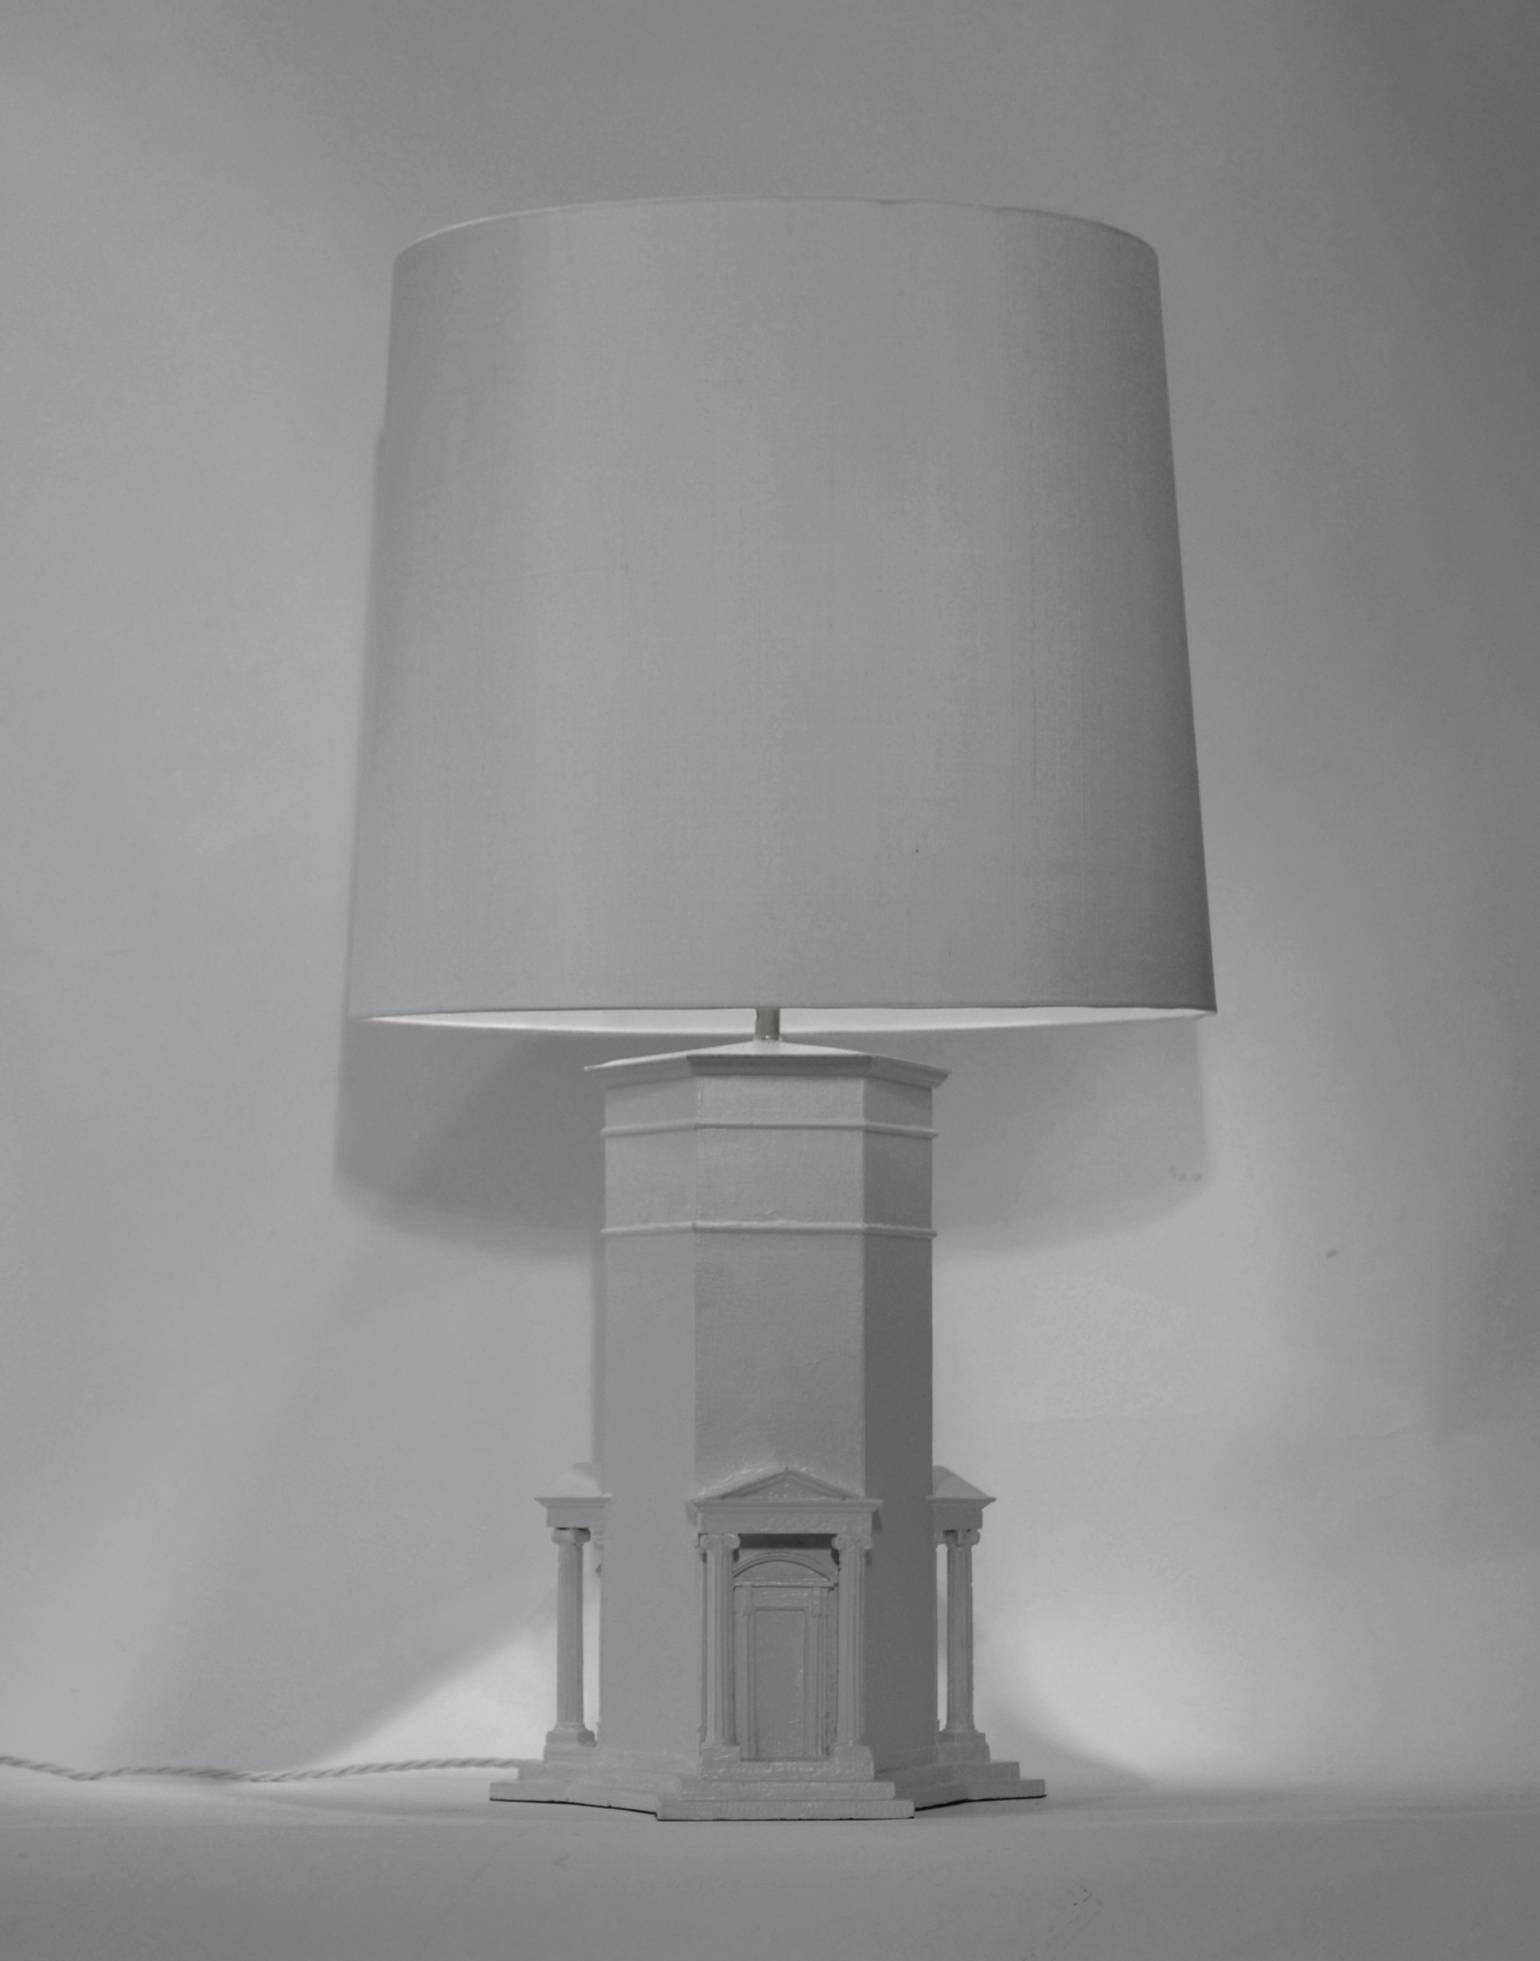 Contemporary take on Grand Tour Architecture. This pair of handmade table lamps are free interpretation models of the 'Tower of the Four Winds', which is said to be the world's first weather station to date back more than 2,000 years, and to have